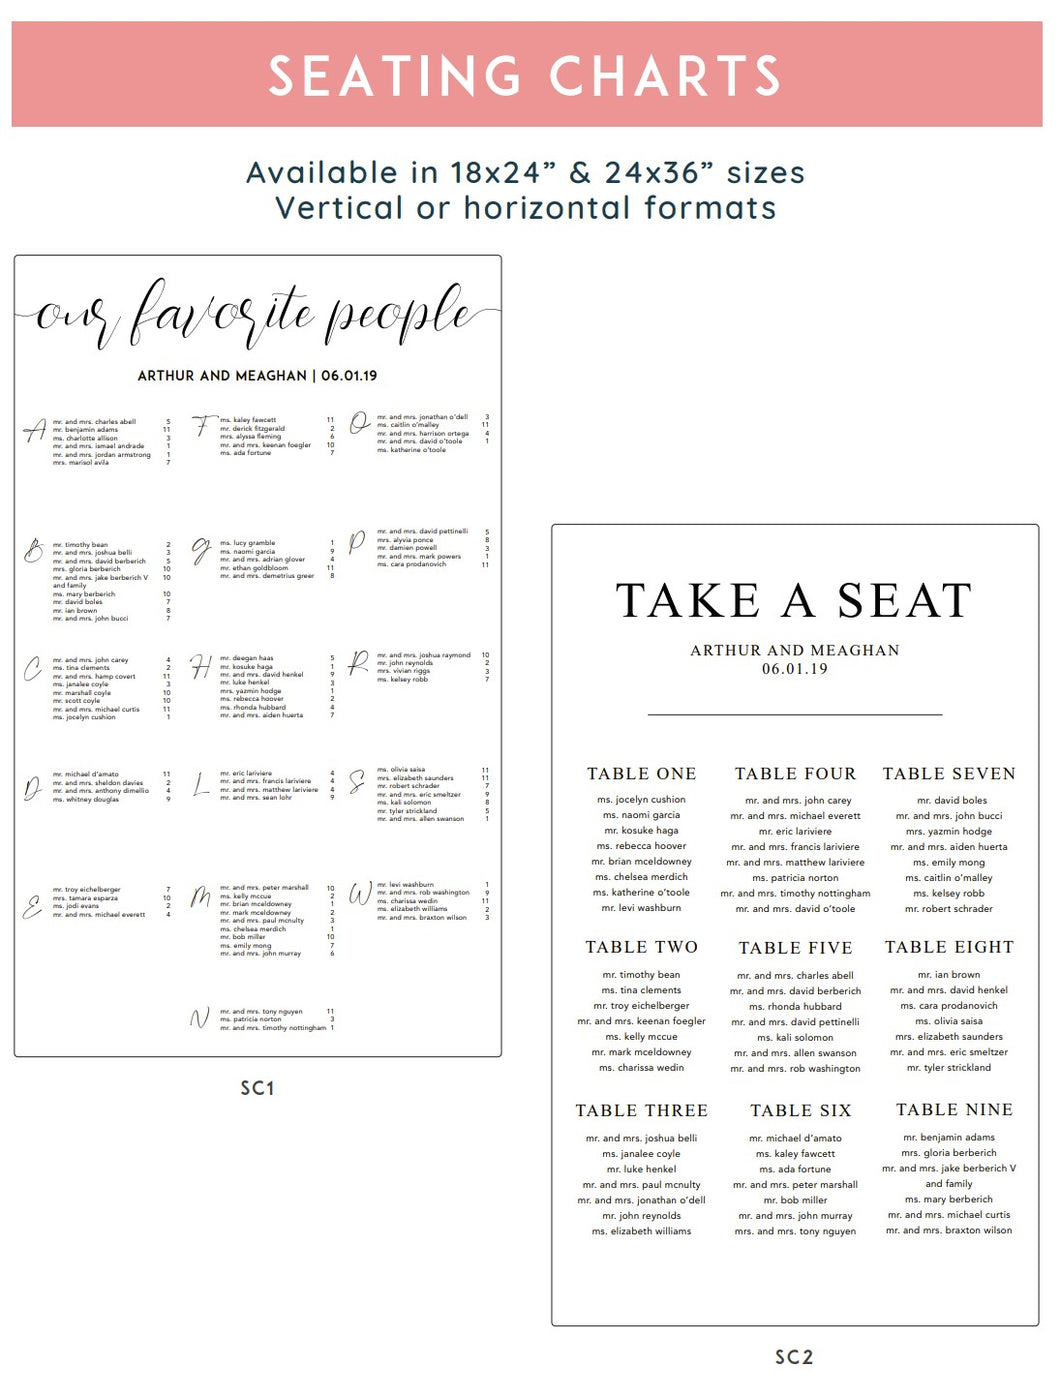 Seating Charts - Beautiful Acrylic Event Signs